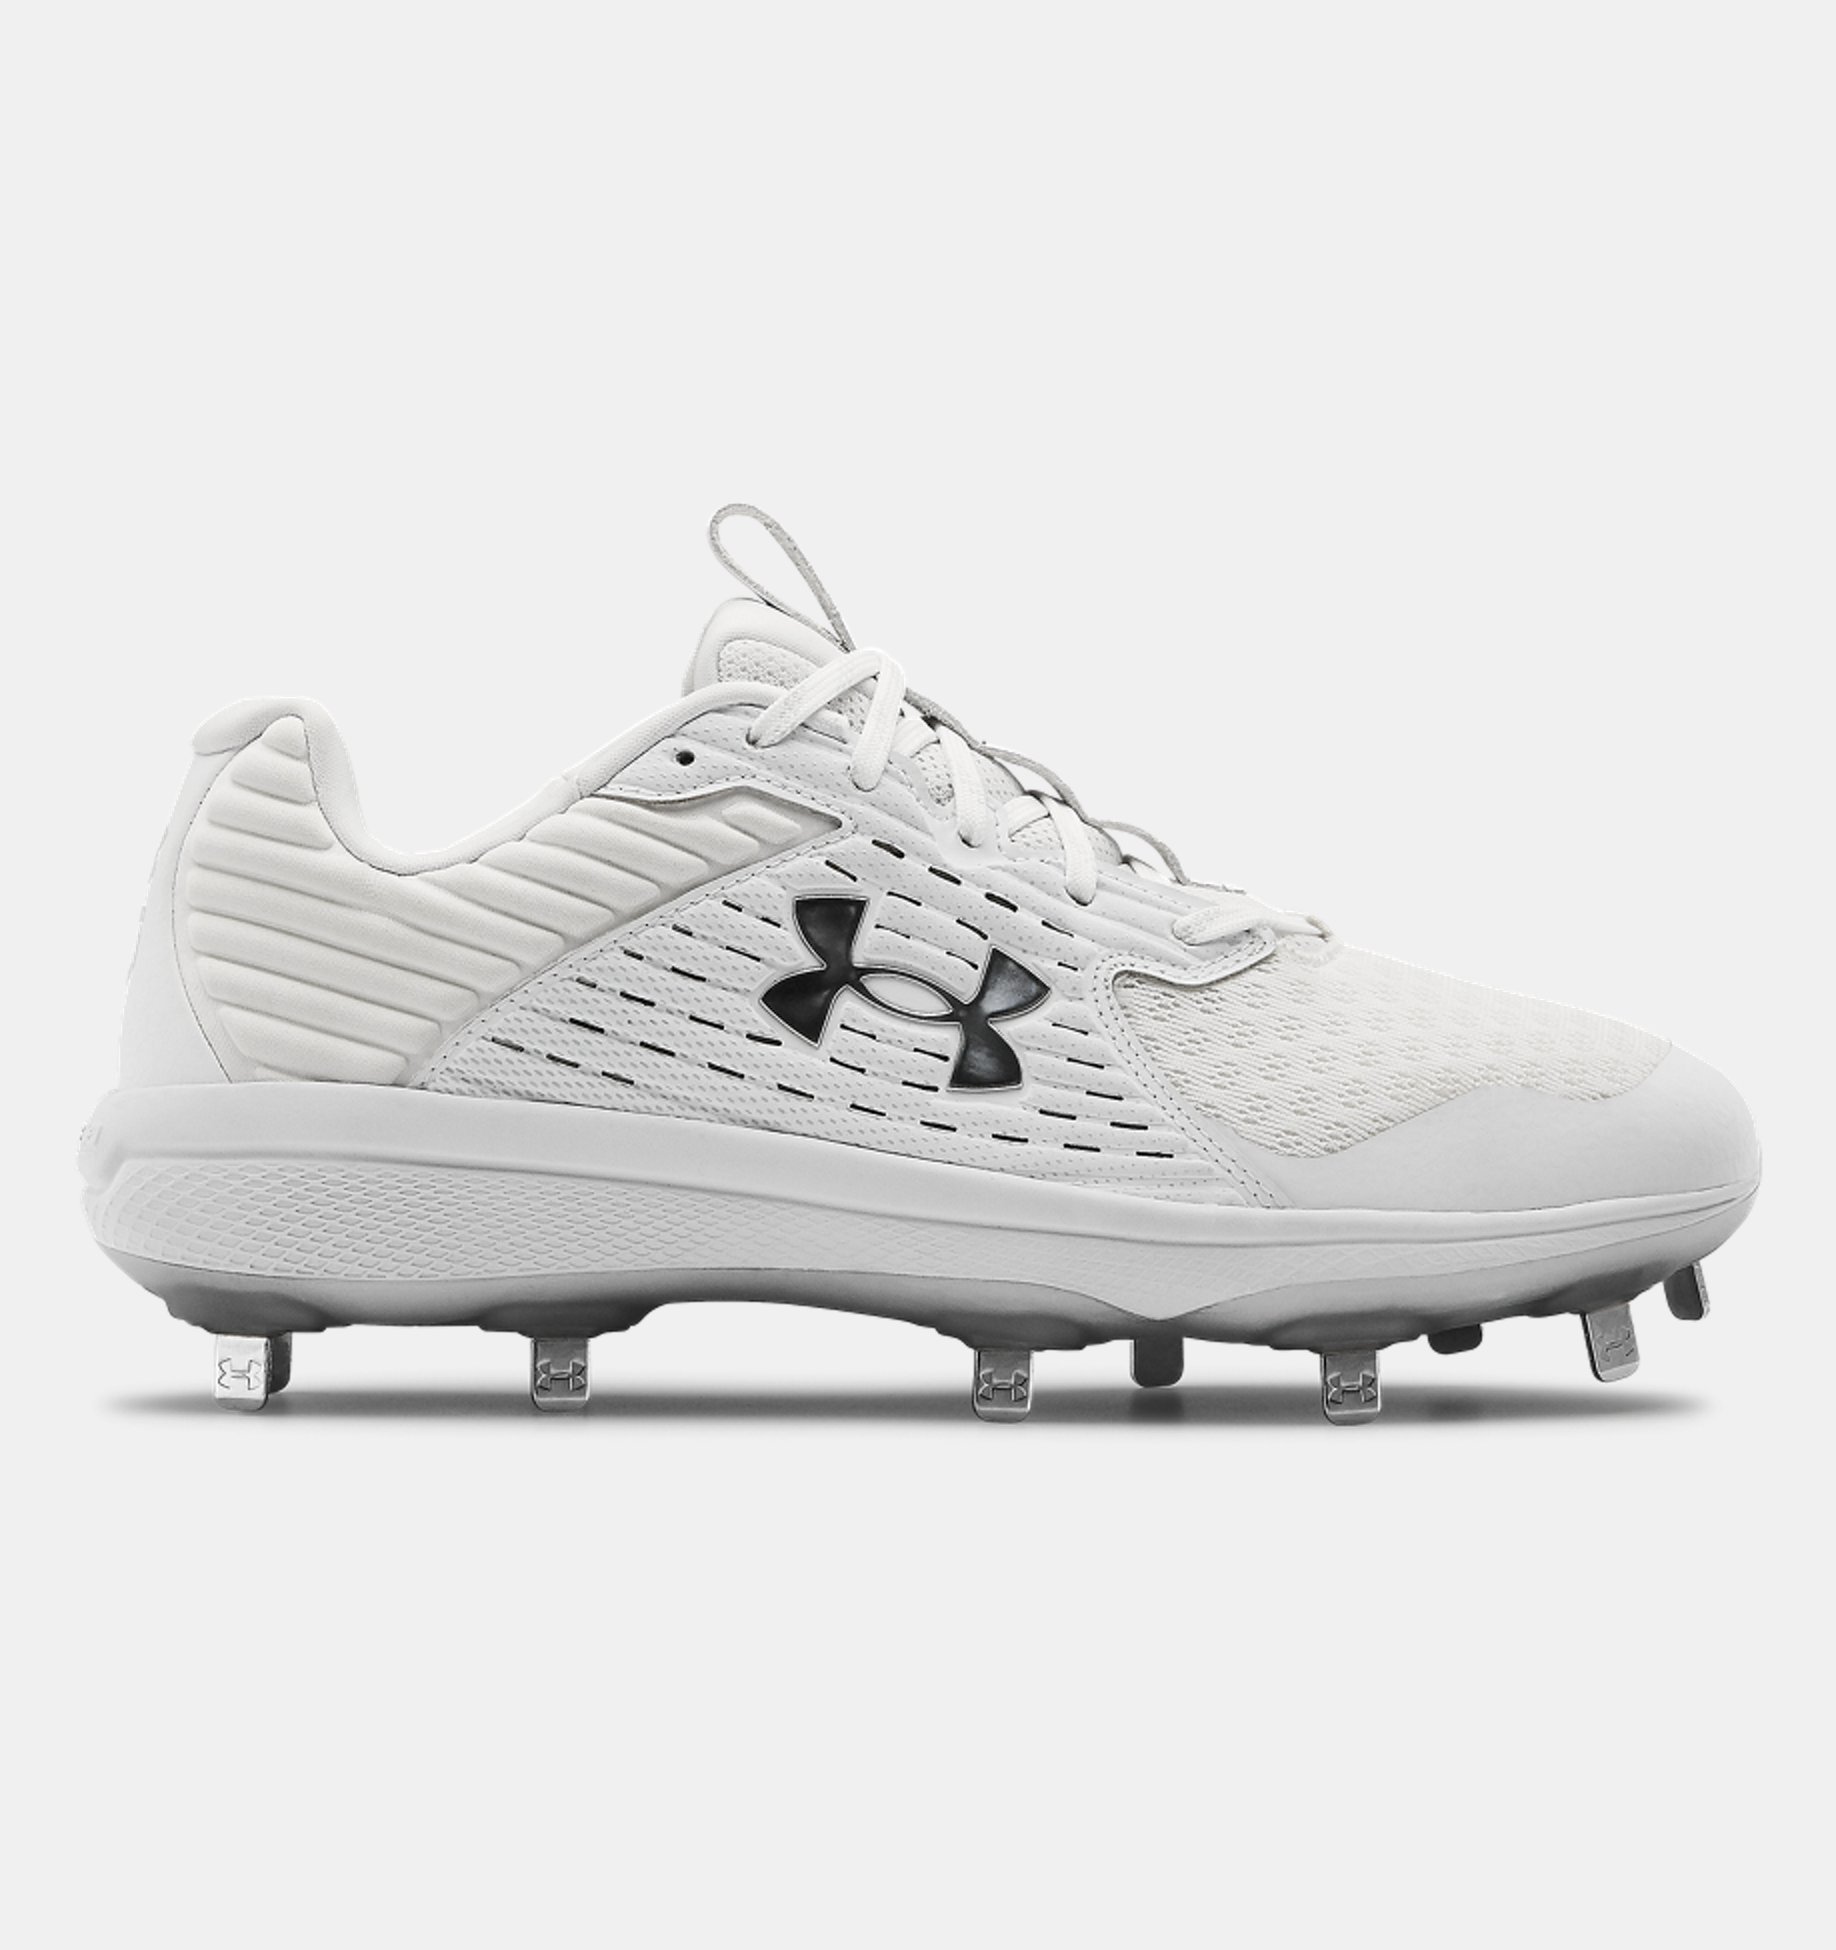 Under Armour Men's UA Yard Low ST 9-Metal Baseball Cleats Shoes 